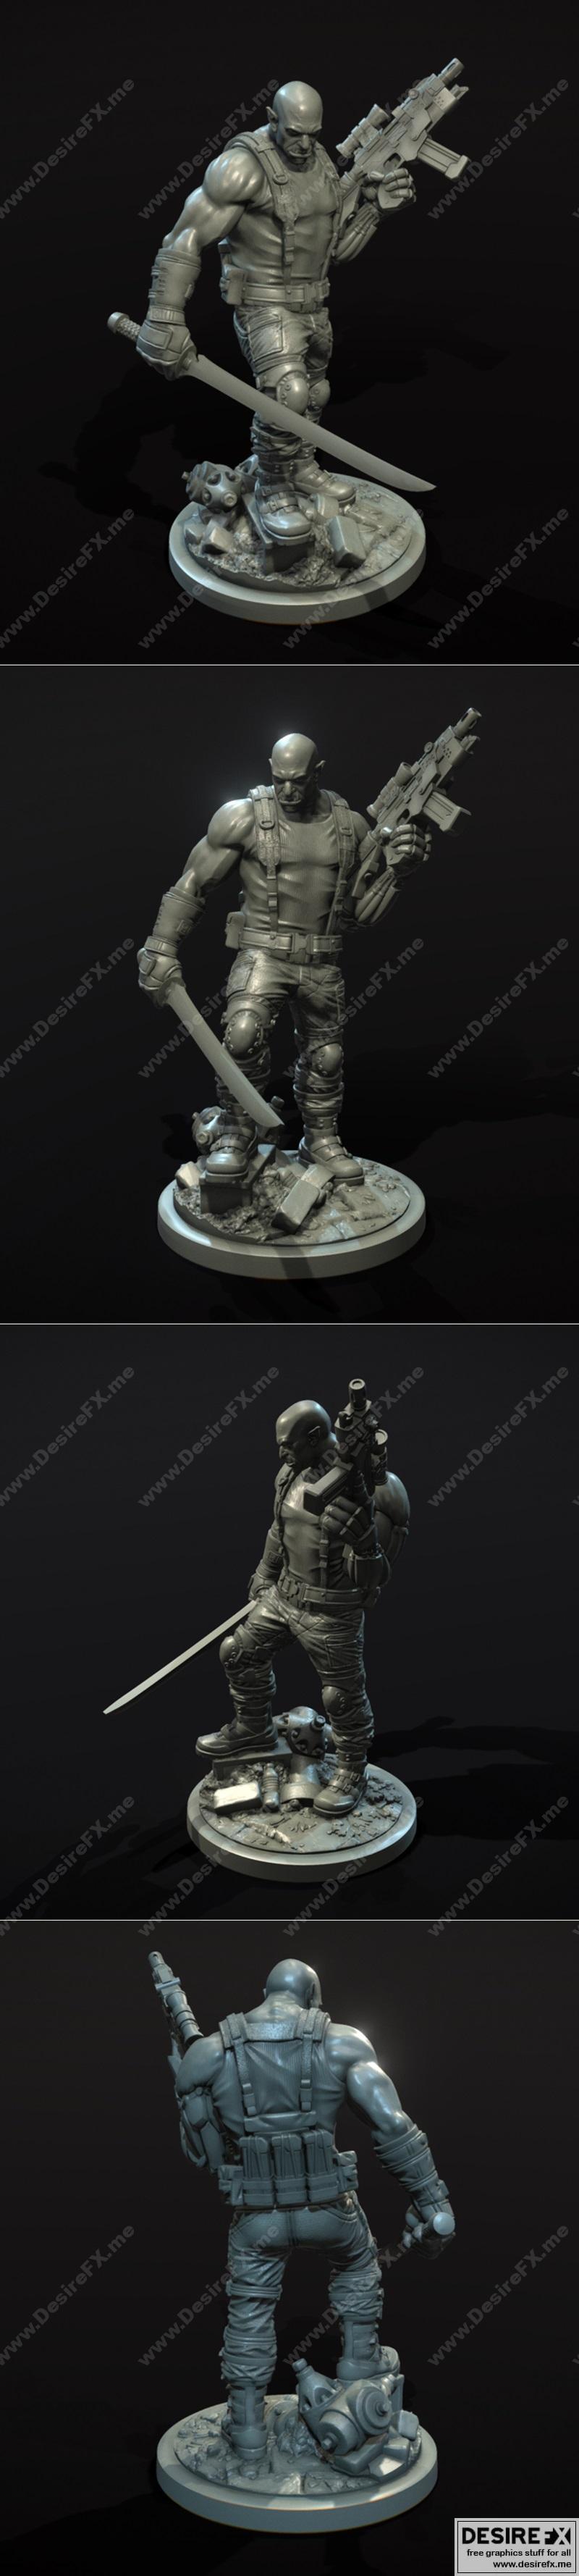 Desire FX 3d models | Shadowrun Sledge Limited Edition Statue – 3D ...